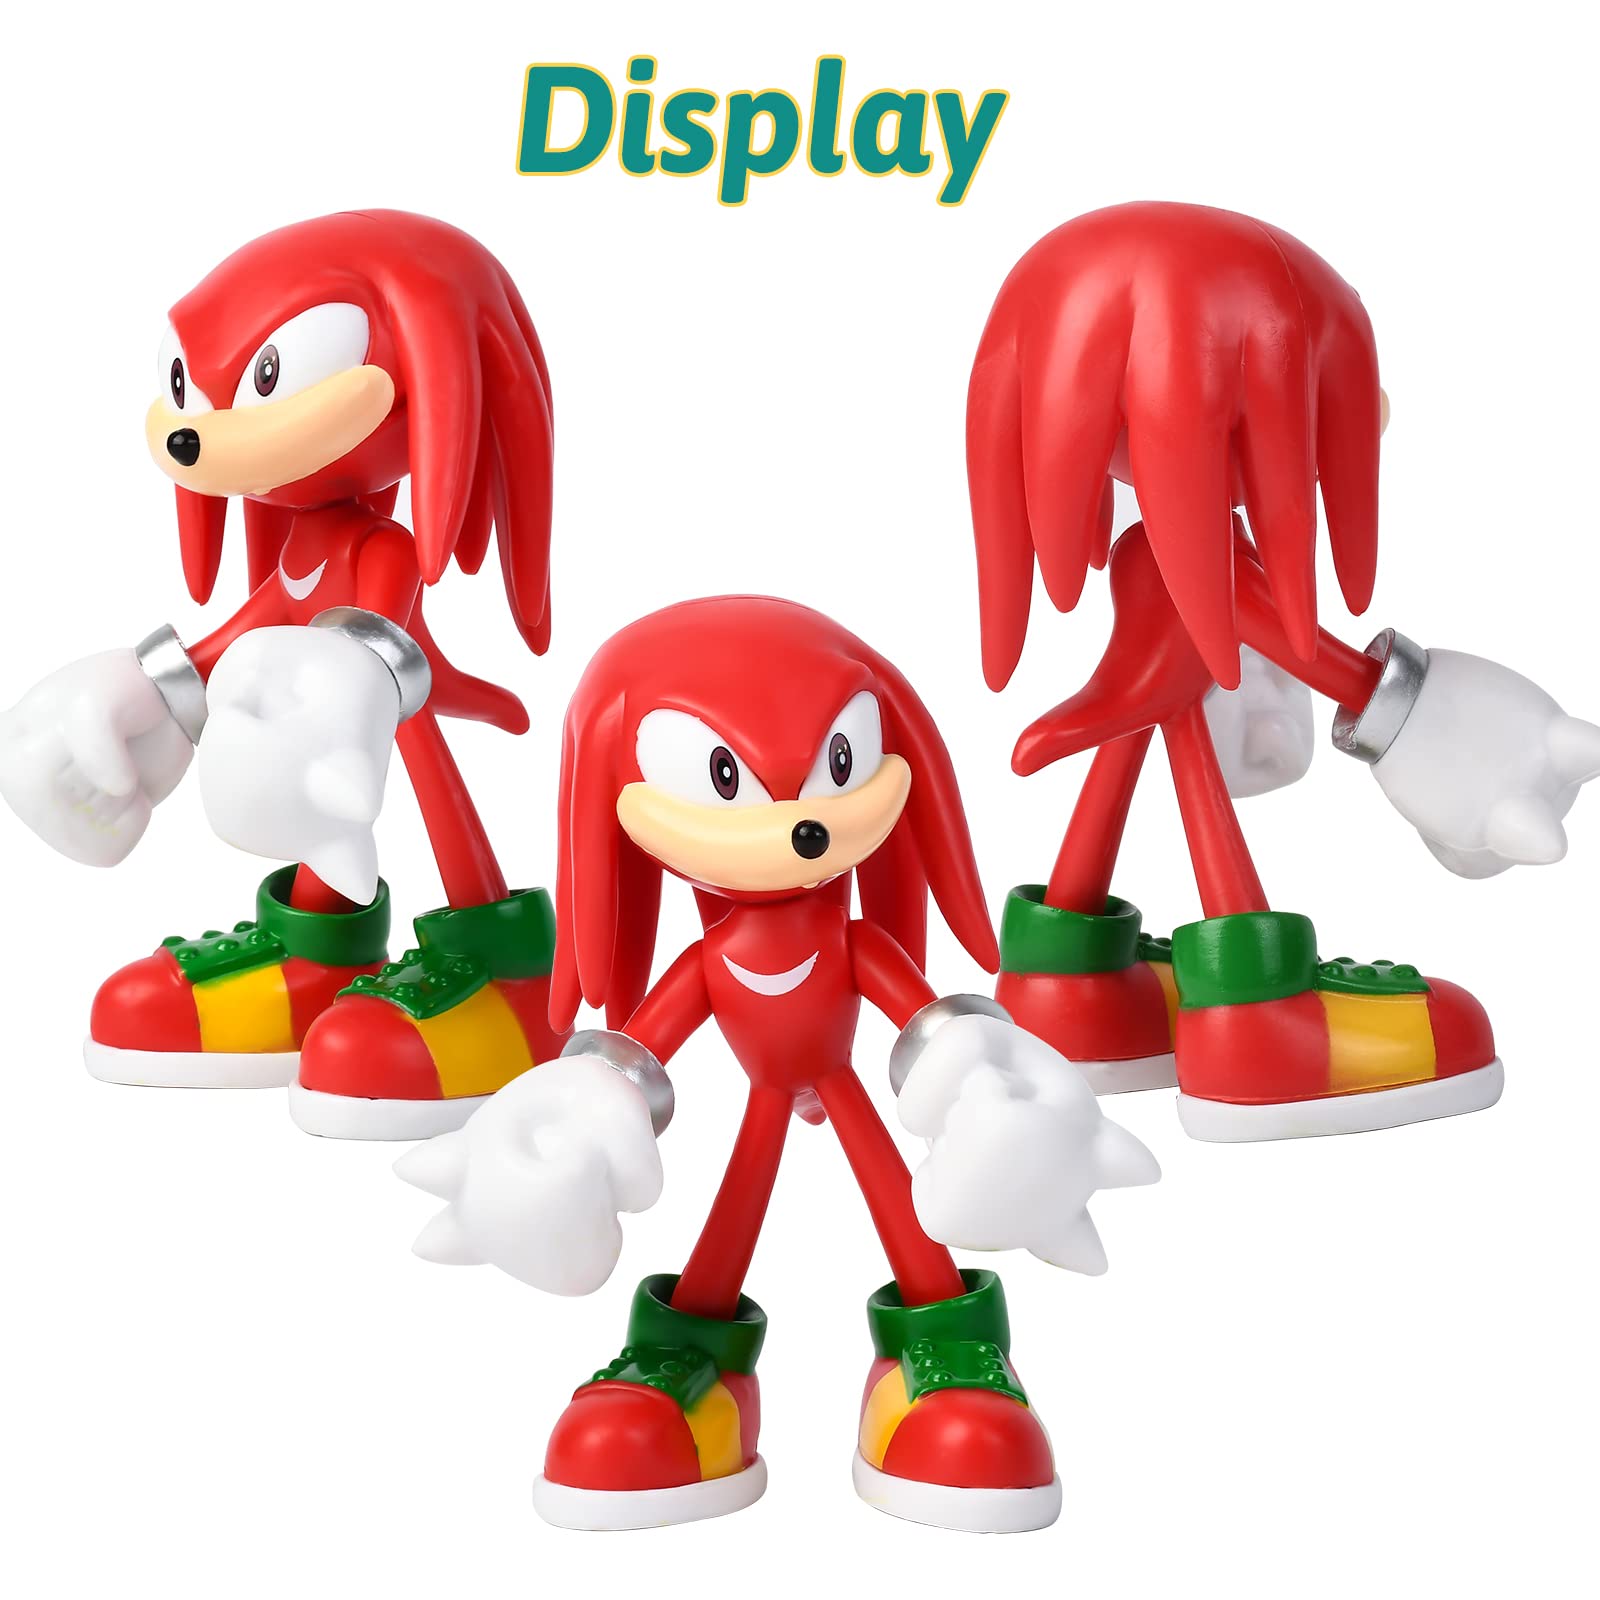 KAMOR Sonic Toys-Action Figures,4.8'' Tall with Movable Joint Playsets Toys, (Pack of 8)